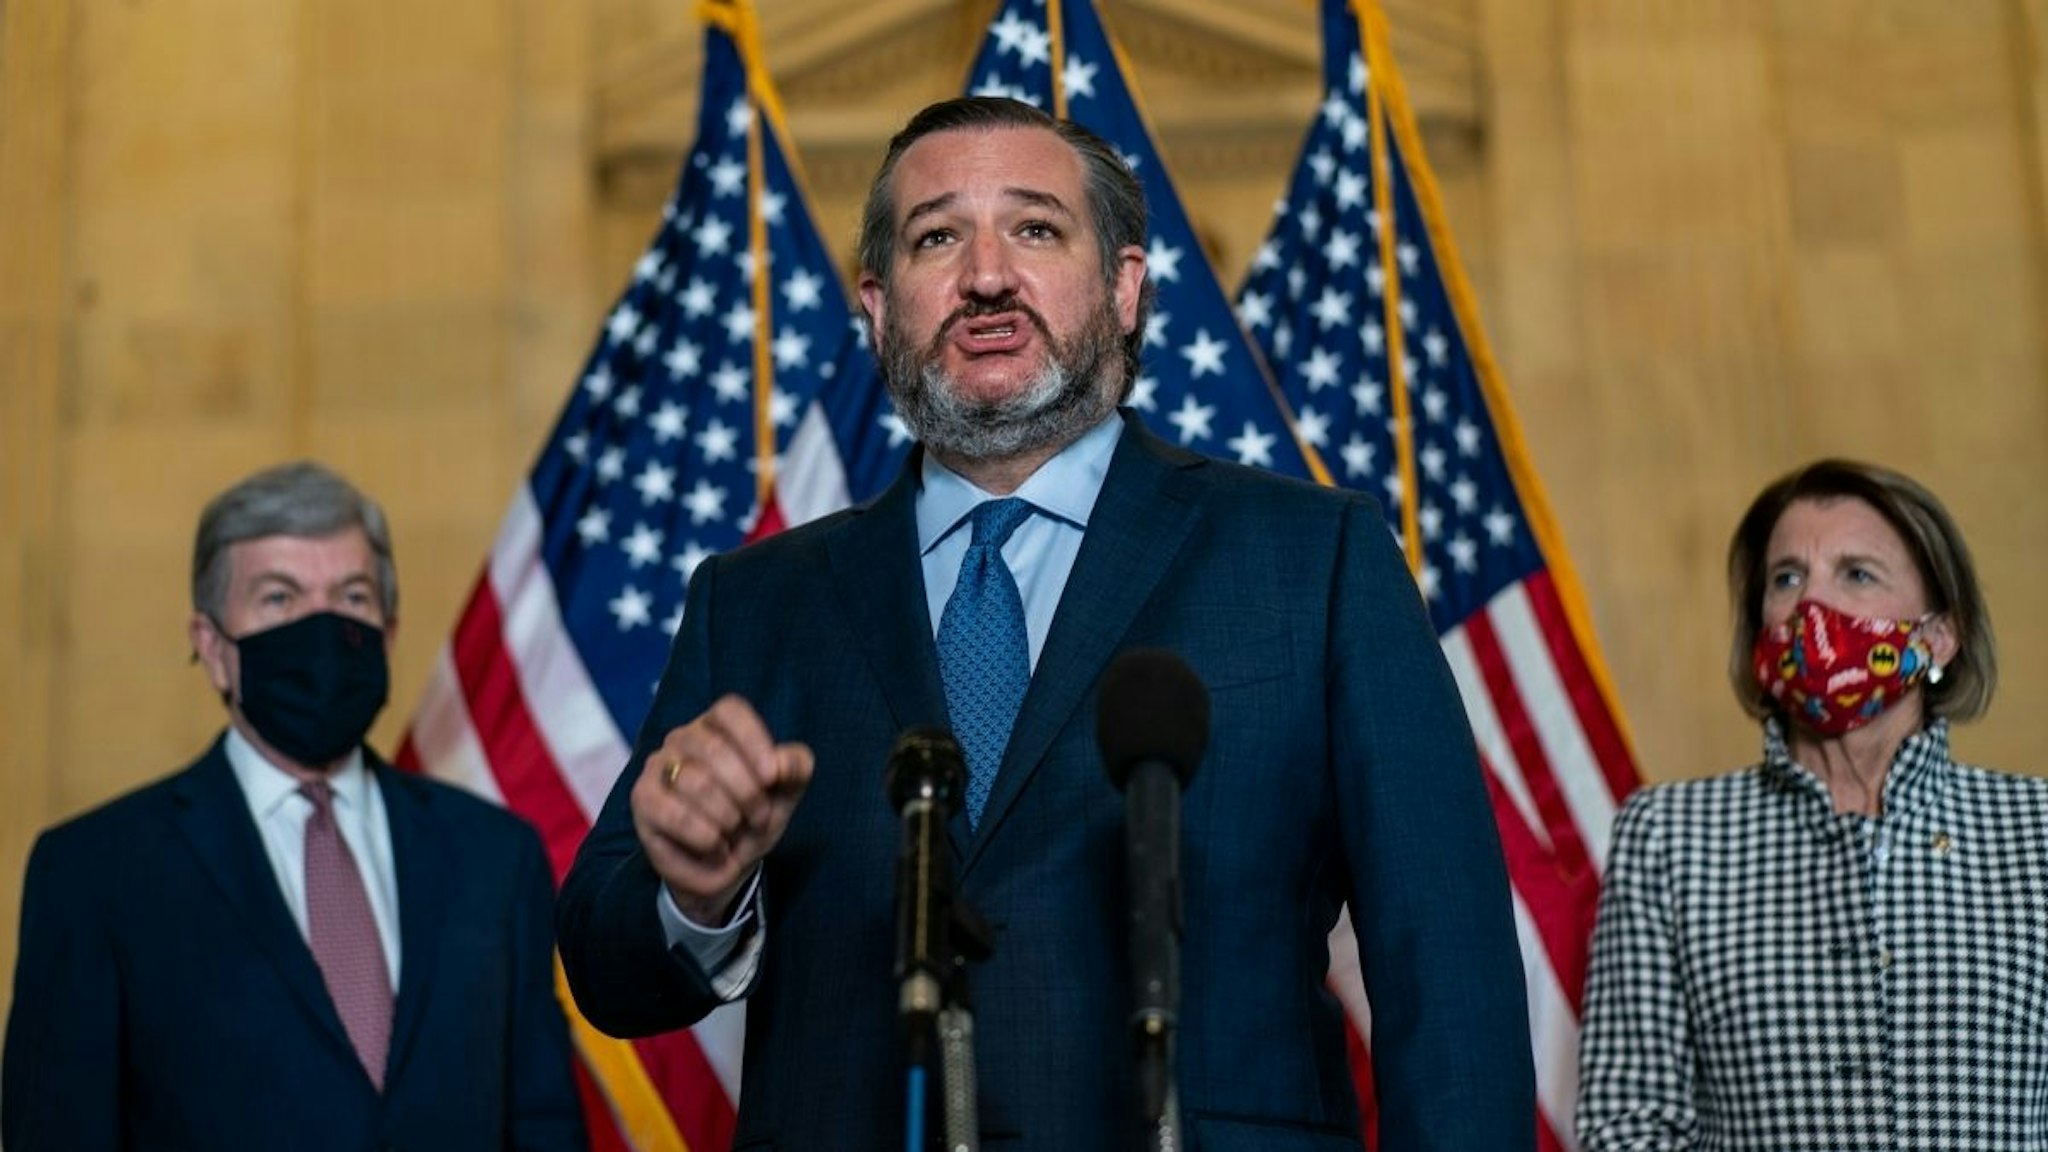 Sen. Ted Cruz (R-TX) speaks during a press conference on Capitol Hill on Thursday, March 4, 2021 in Washington, DC.